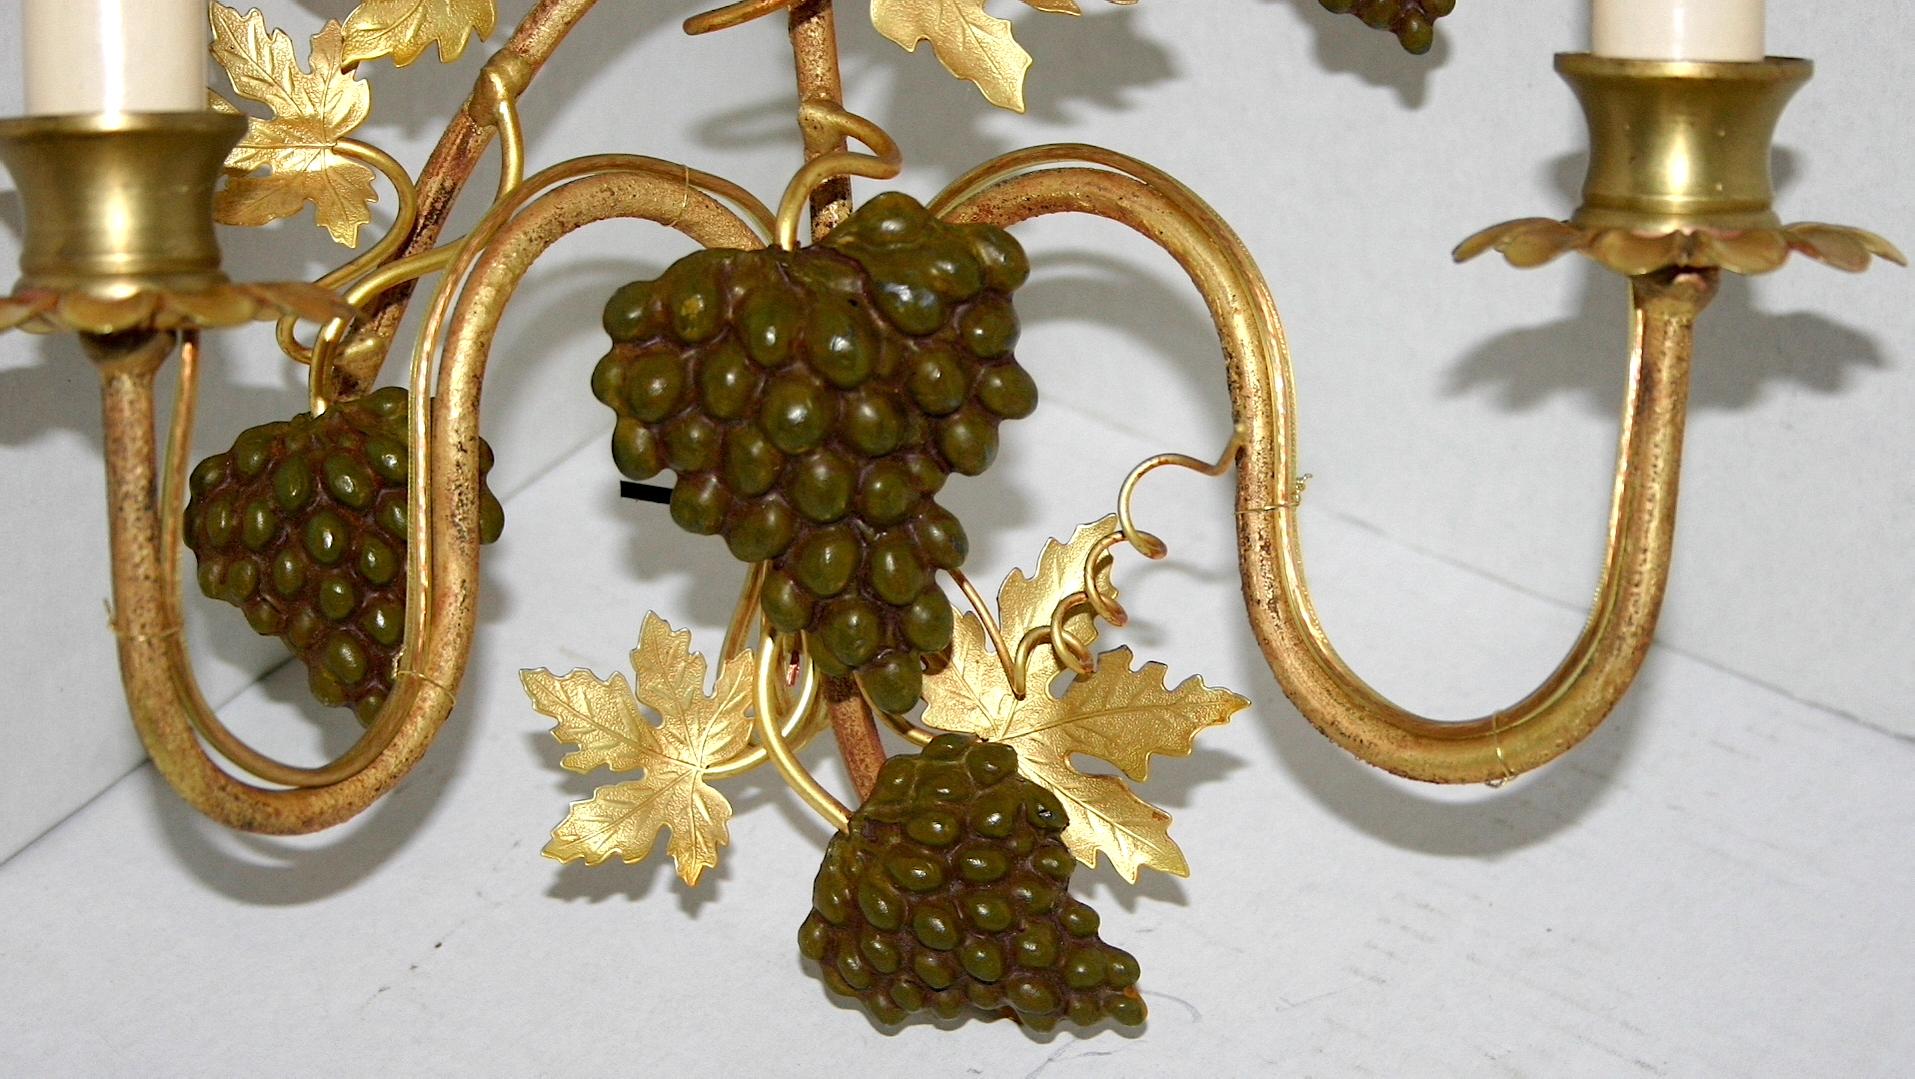 Pair of 1920s gilt bronze Italian sconces depicting grapevines with cluster of grapes.

Measurements: 
Height 14.5 in.
Depth 4.5 in.
Width/length: 10 in.

